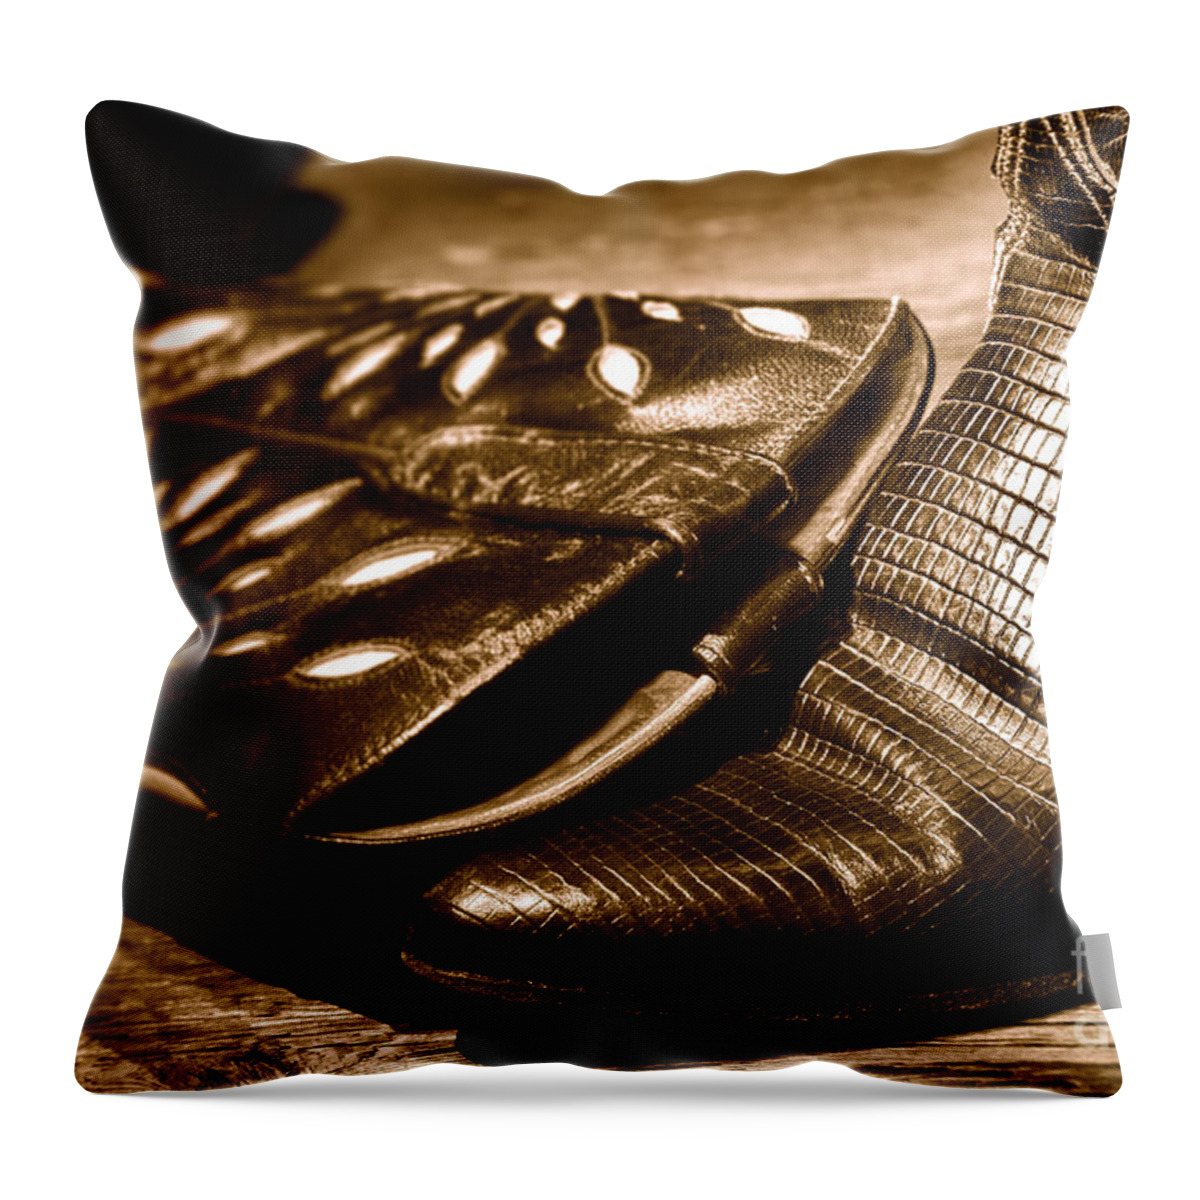 Boots Throw Pillow featuring the photograph Cowgirl Gator Boots - Sepia by Olivier Le Queinec